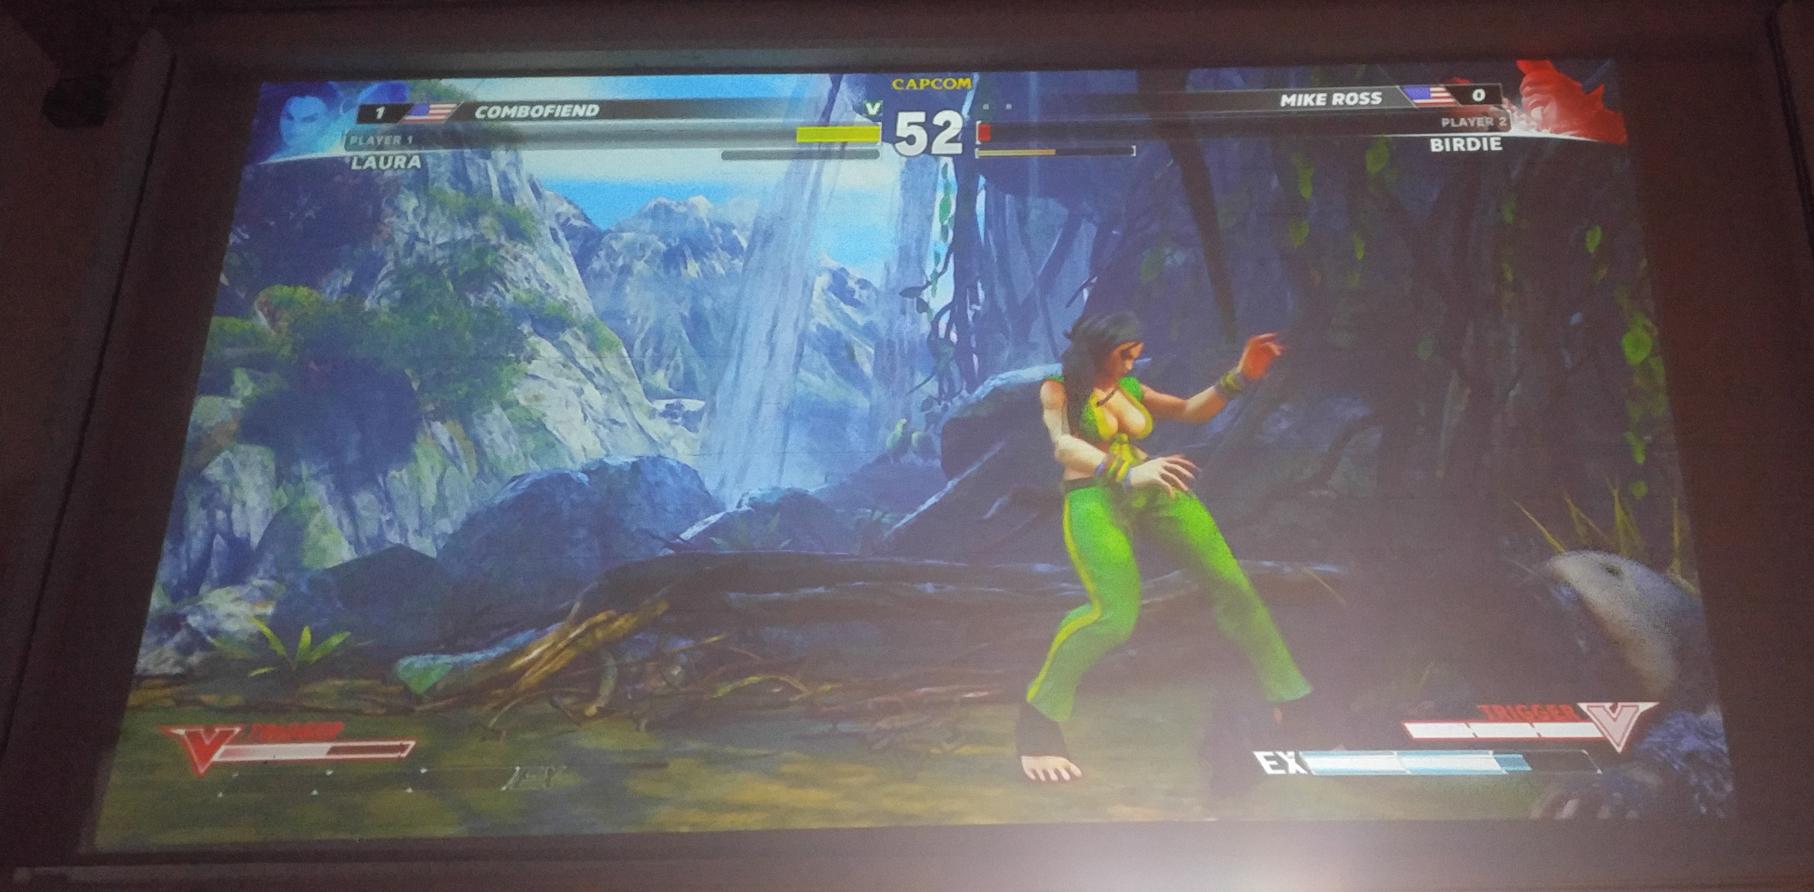 Mad Catz Street Fighter V Cup Combofiend Mike Ross Laura Birdie